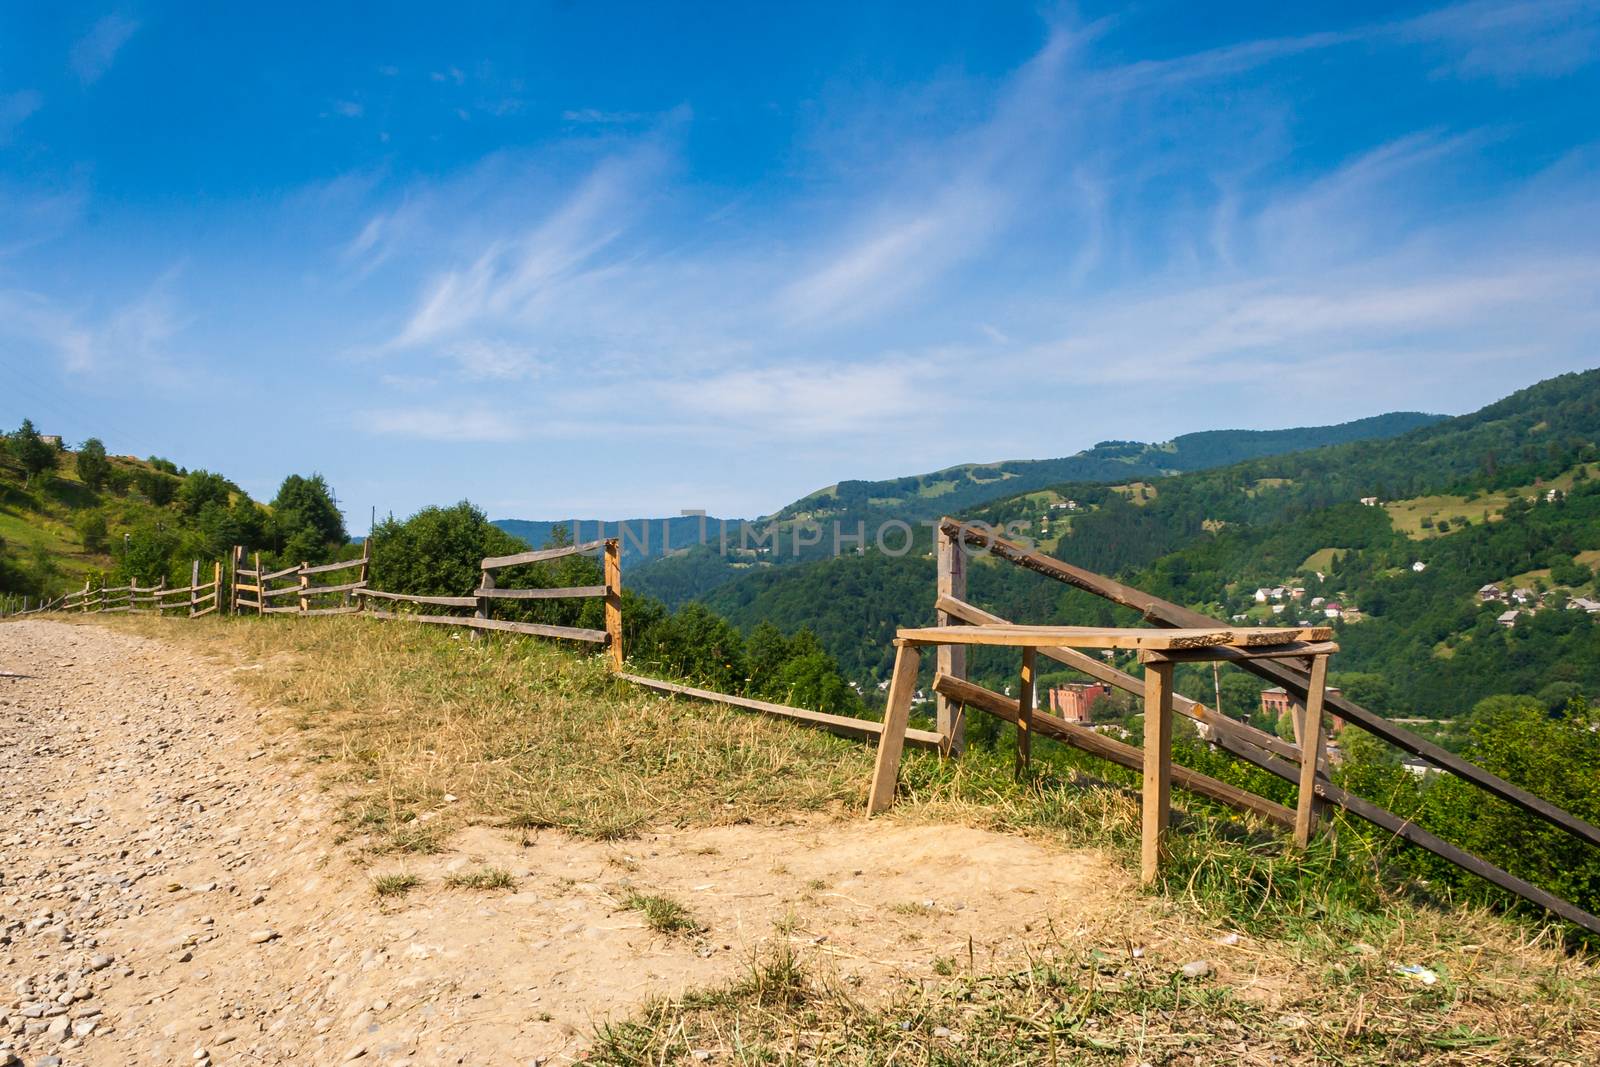 wooden stck fence in mountains with blue sky